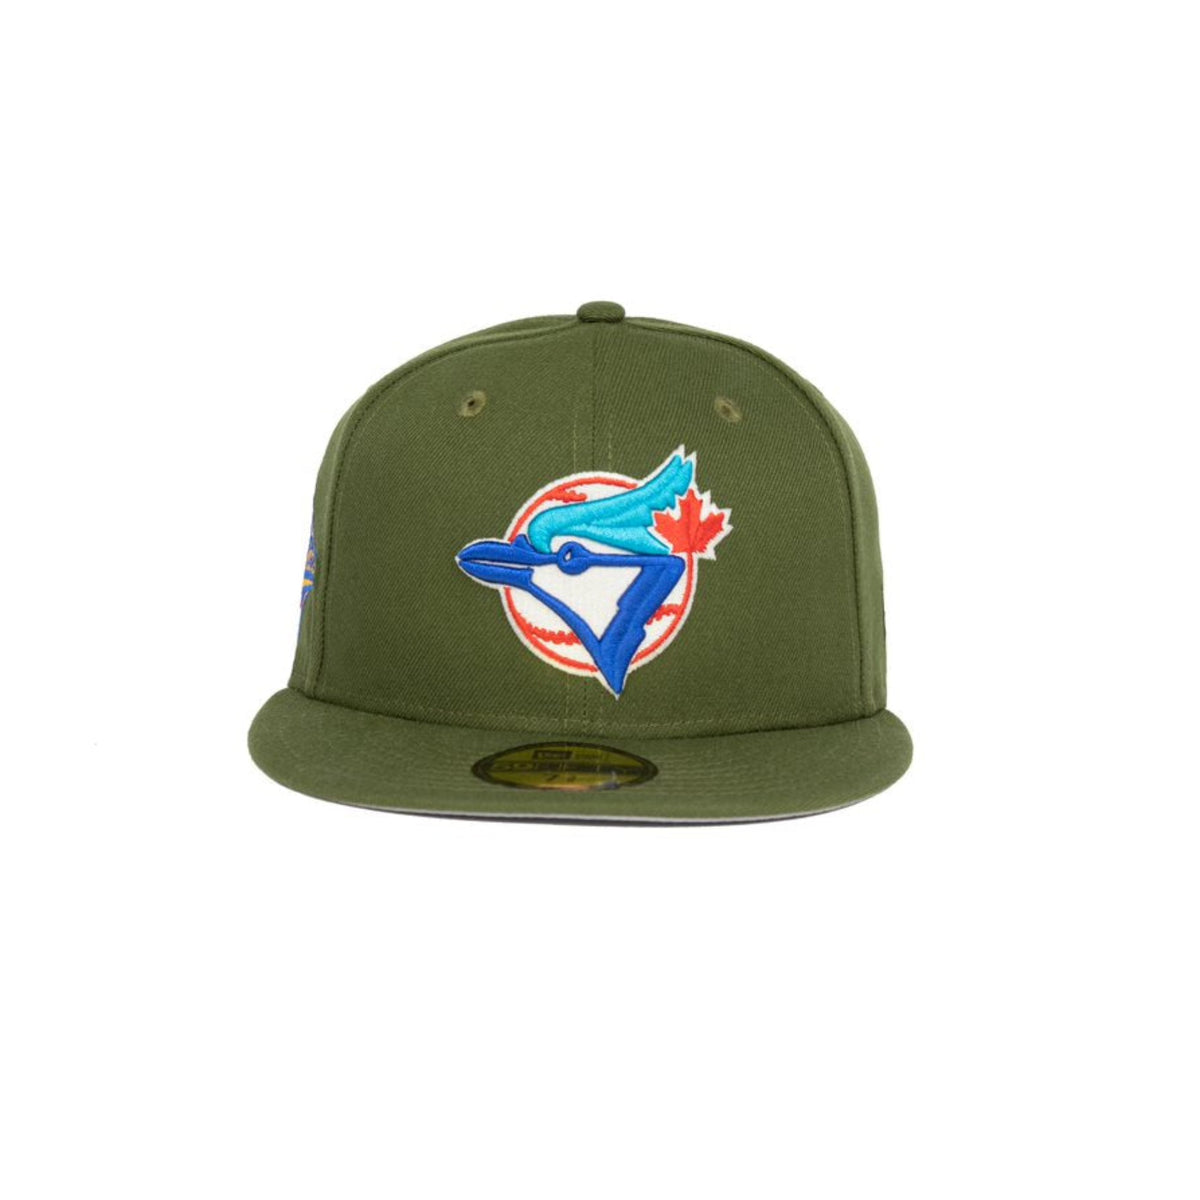 Toronto Blue Jays New Era Cooperstown Collection 1993